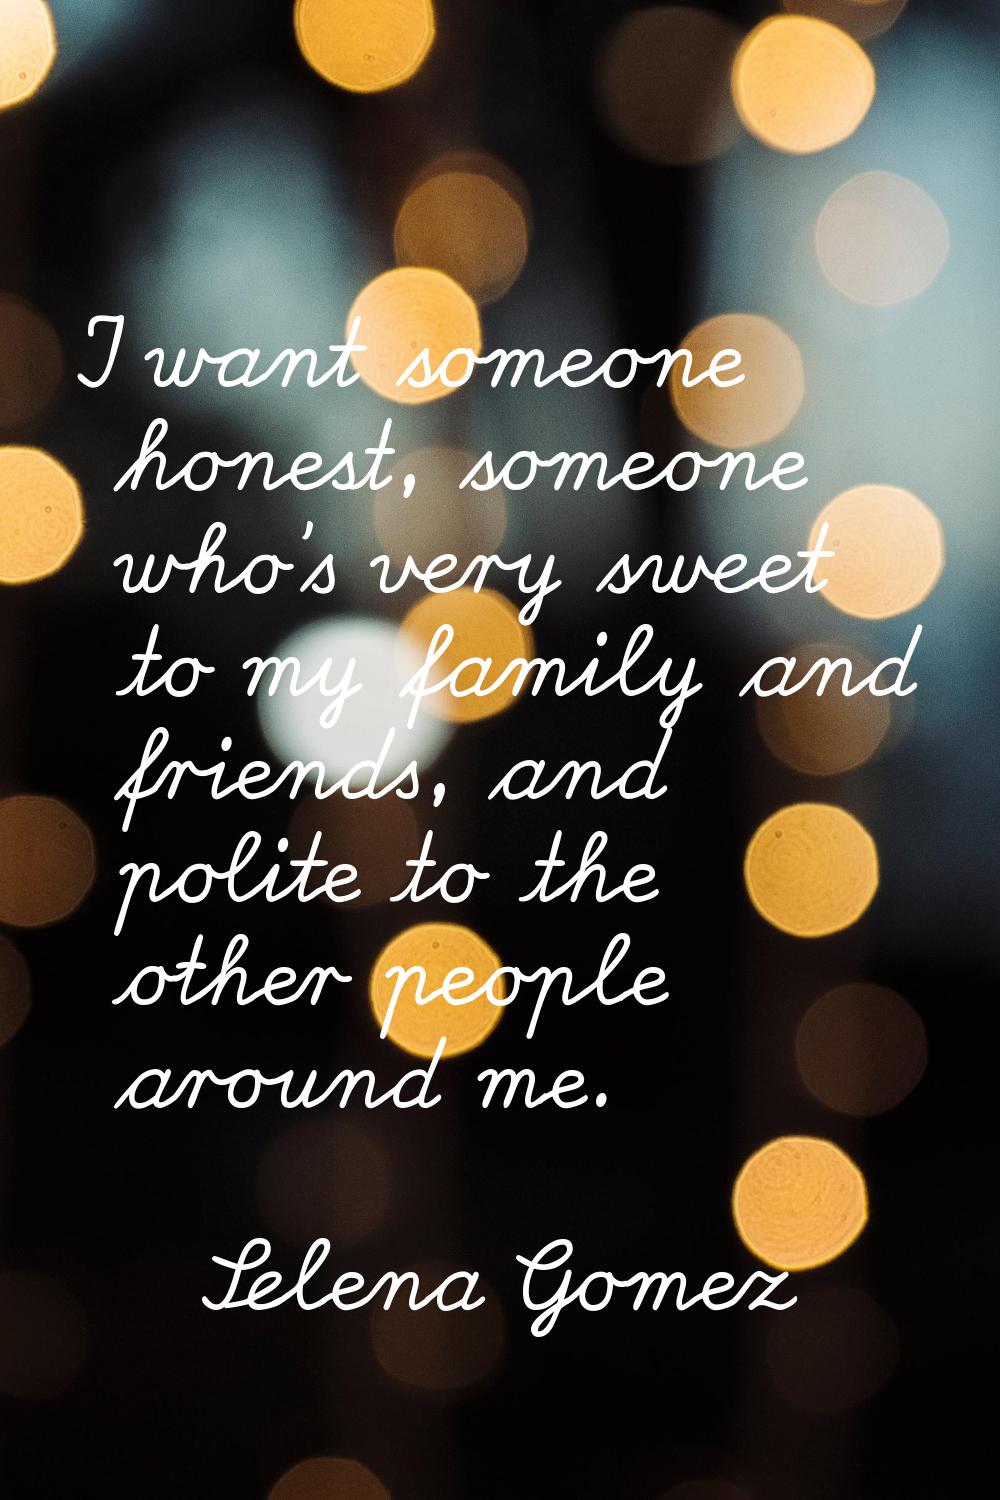 I want someone honest, someone who's very sweet to my family and friends, and polite to the other p